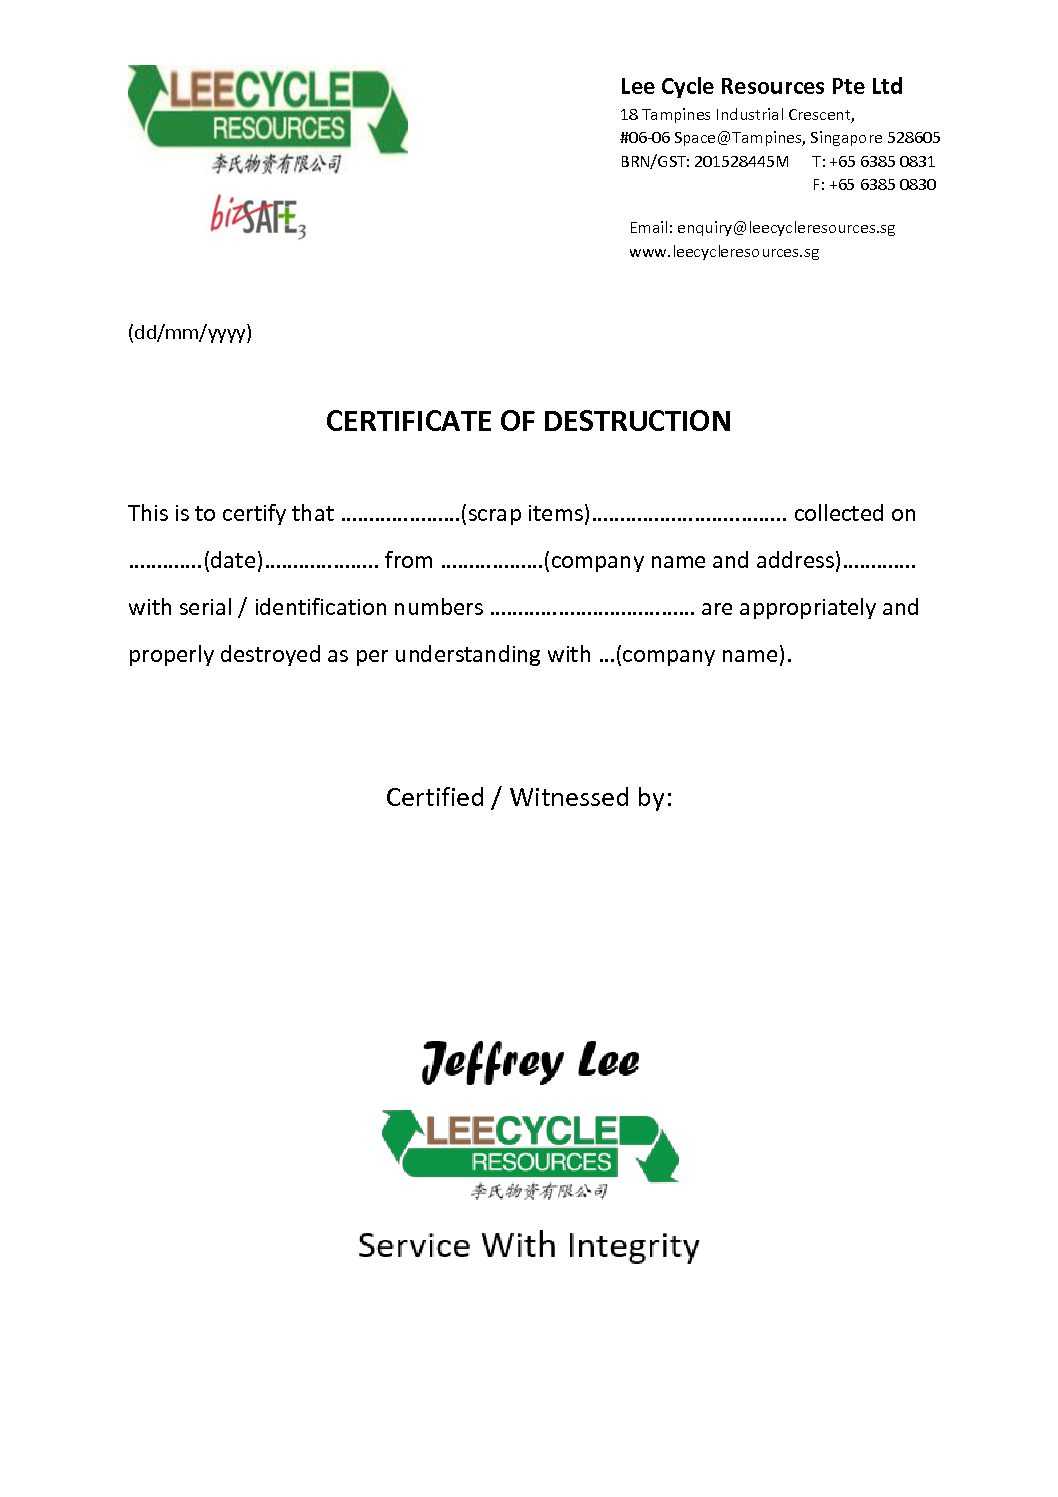 Certificate Of Destruction – Leecycle Resources Singapore Within Certificate Of Destruction Template